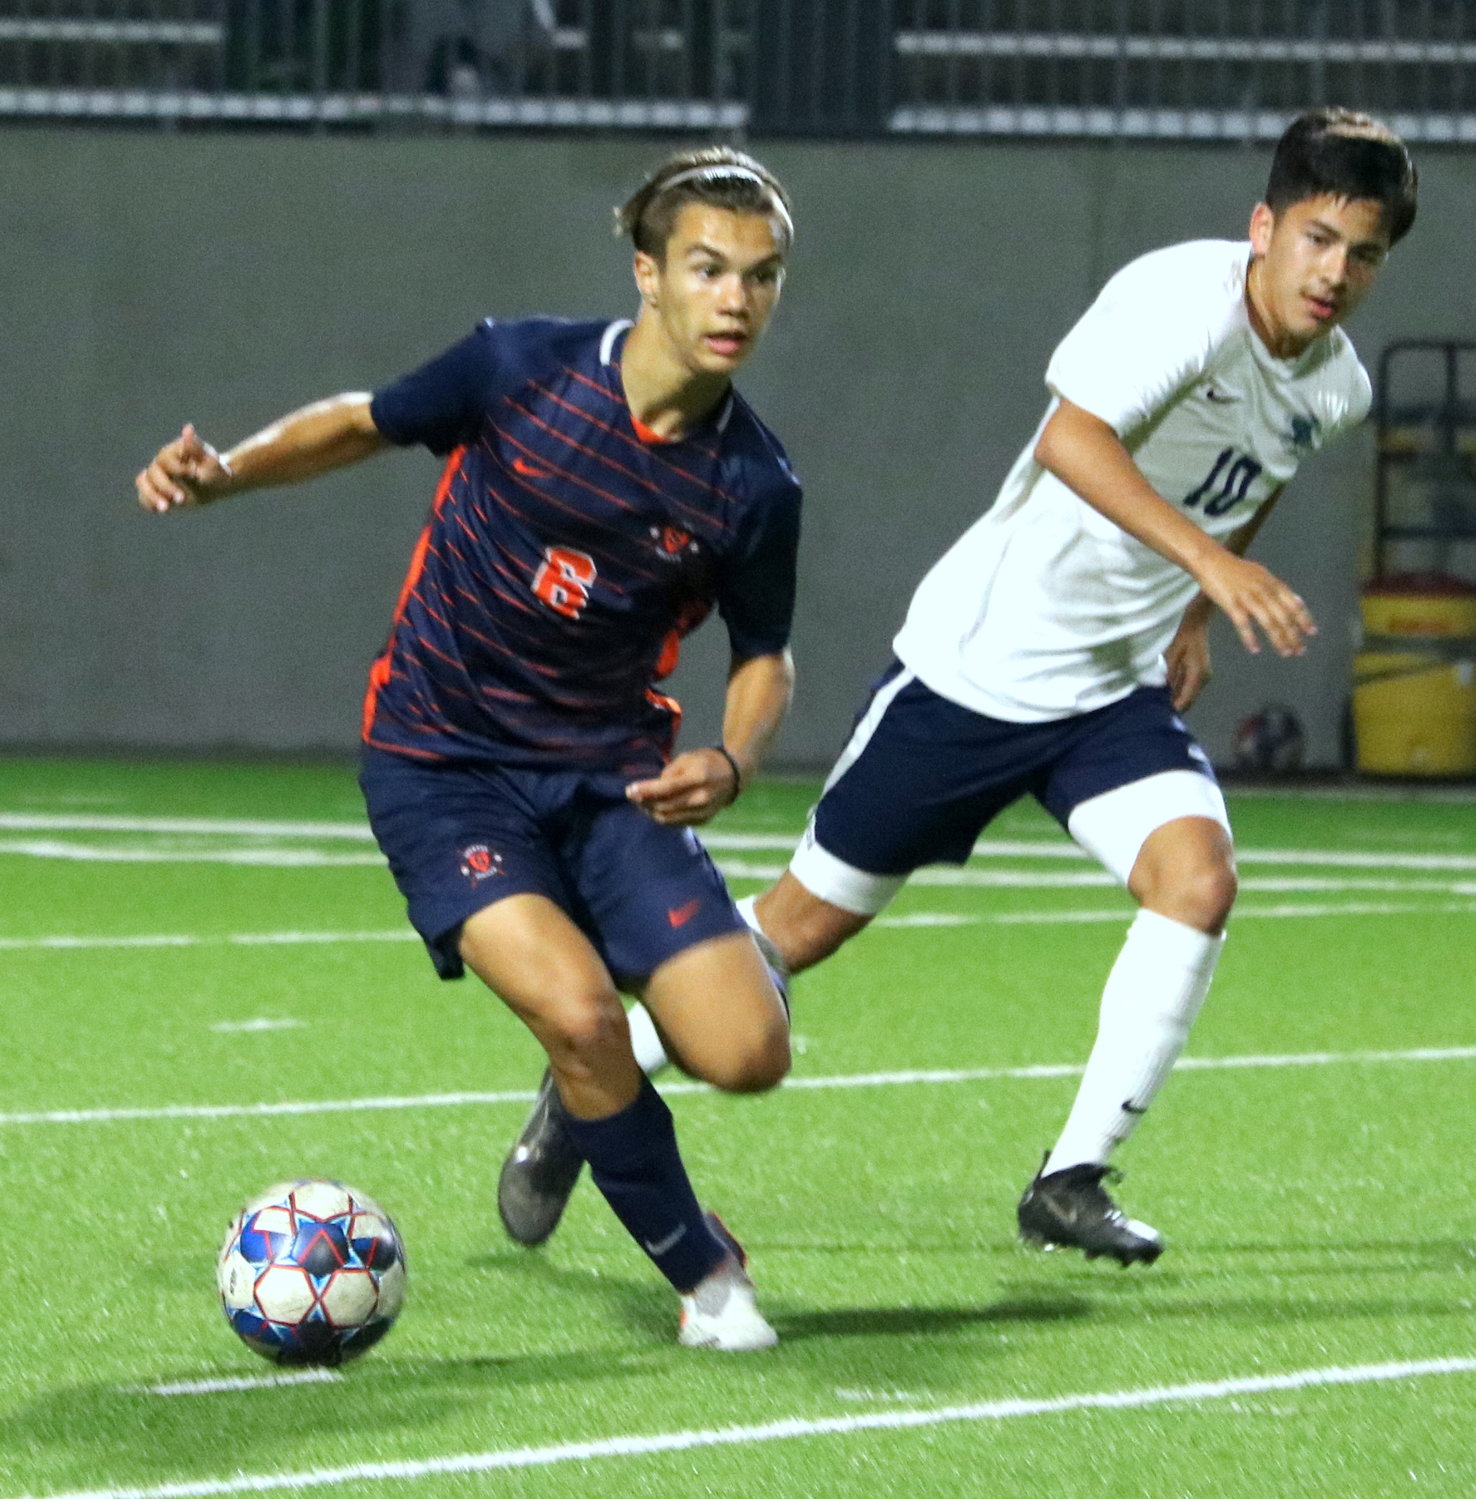 Kortay Koc dribbles past a defender during Tuesday’s Class 6A area round game between Seven Lakes and Cy-Ridge at Legacy Stadium.